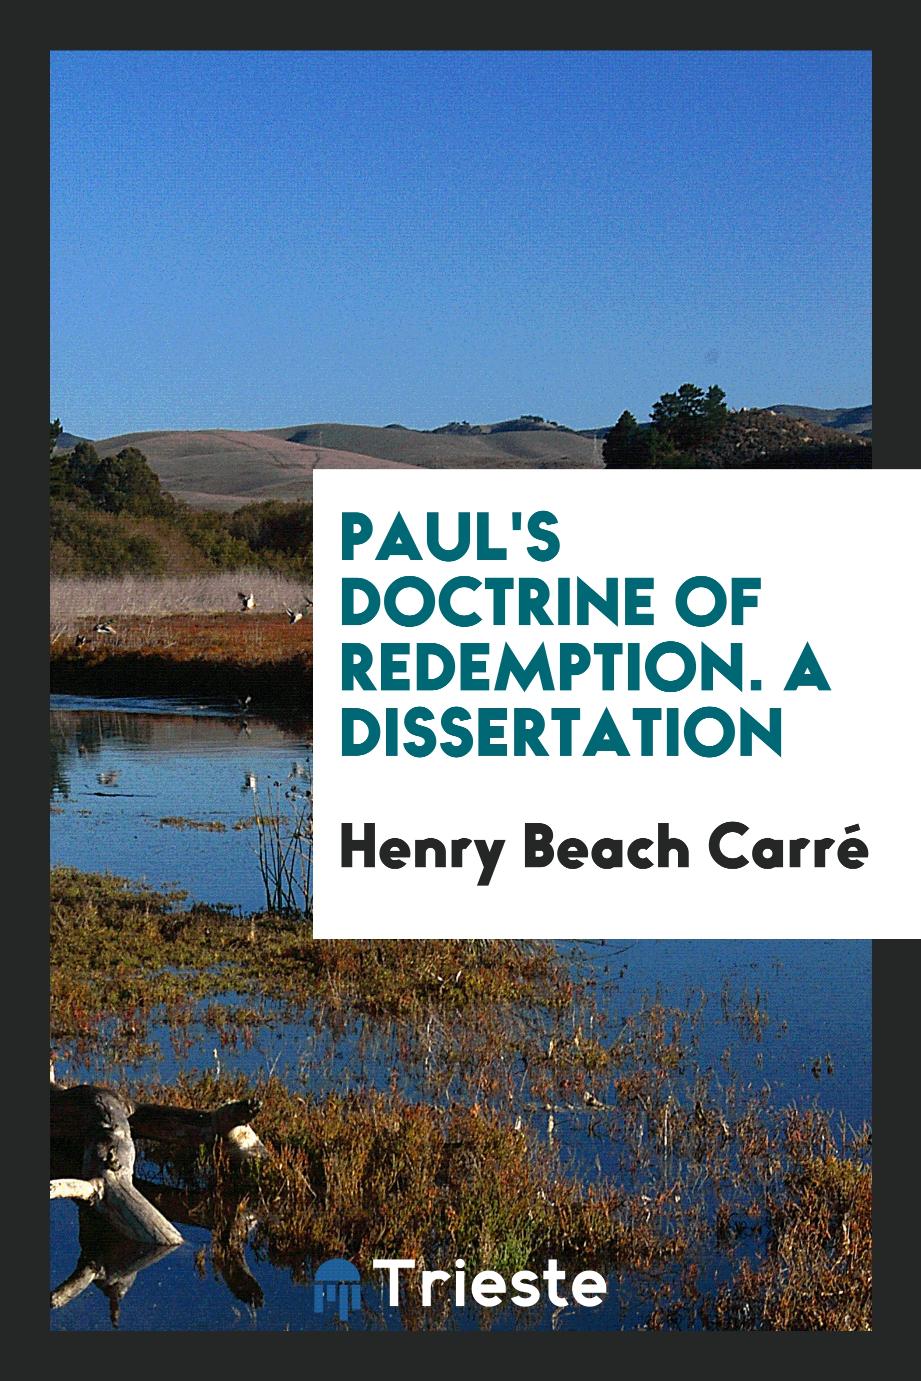 Paul's doctrine of redemption. A Dissertation